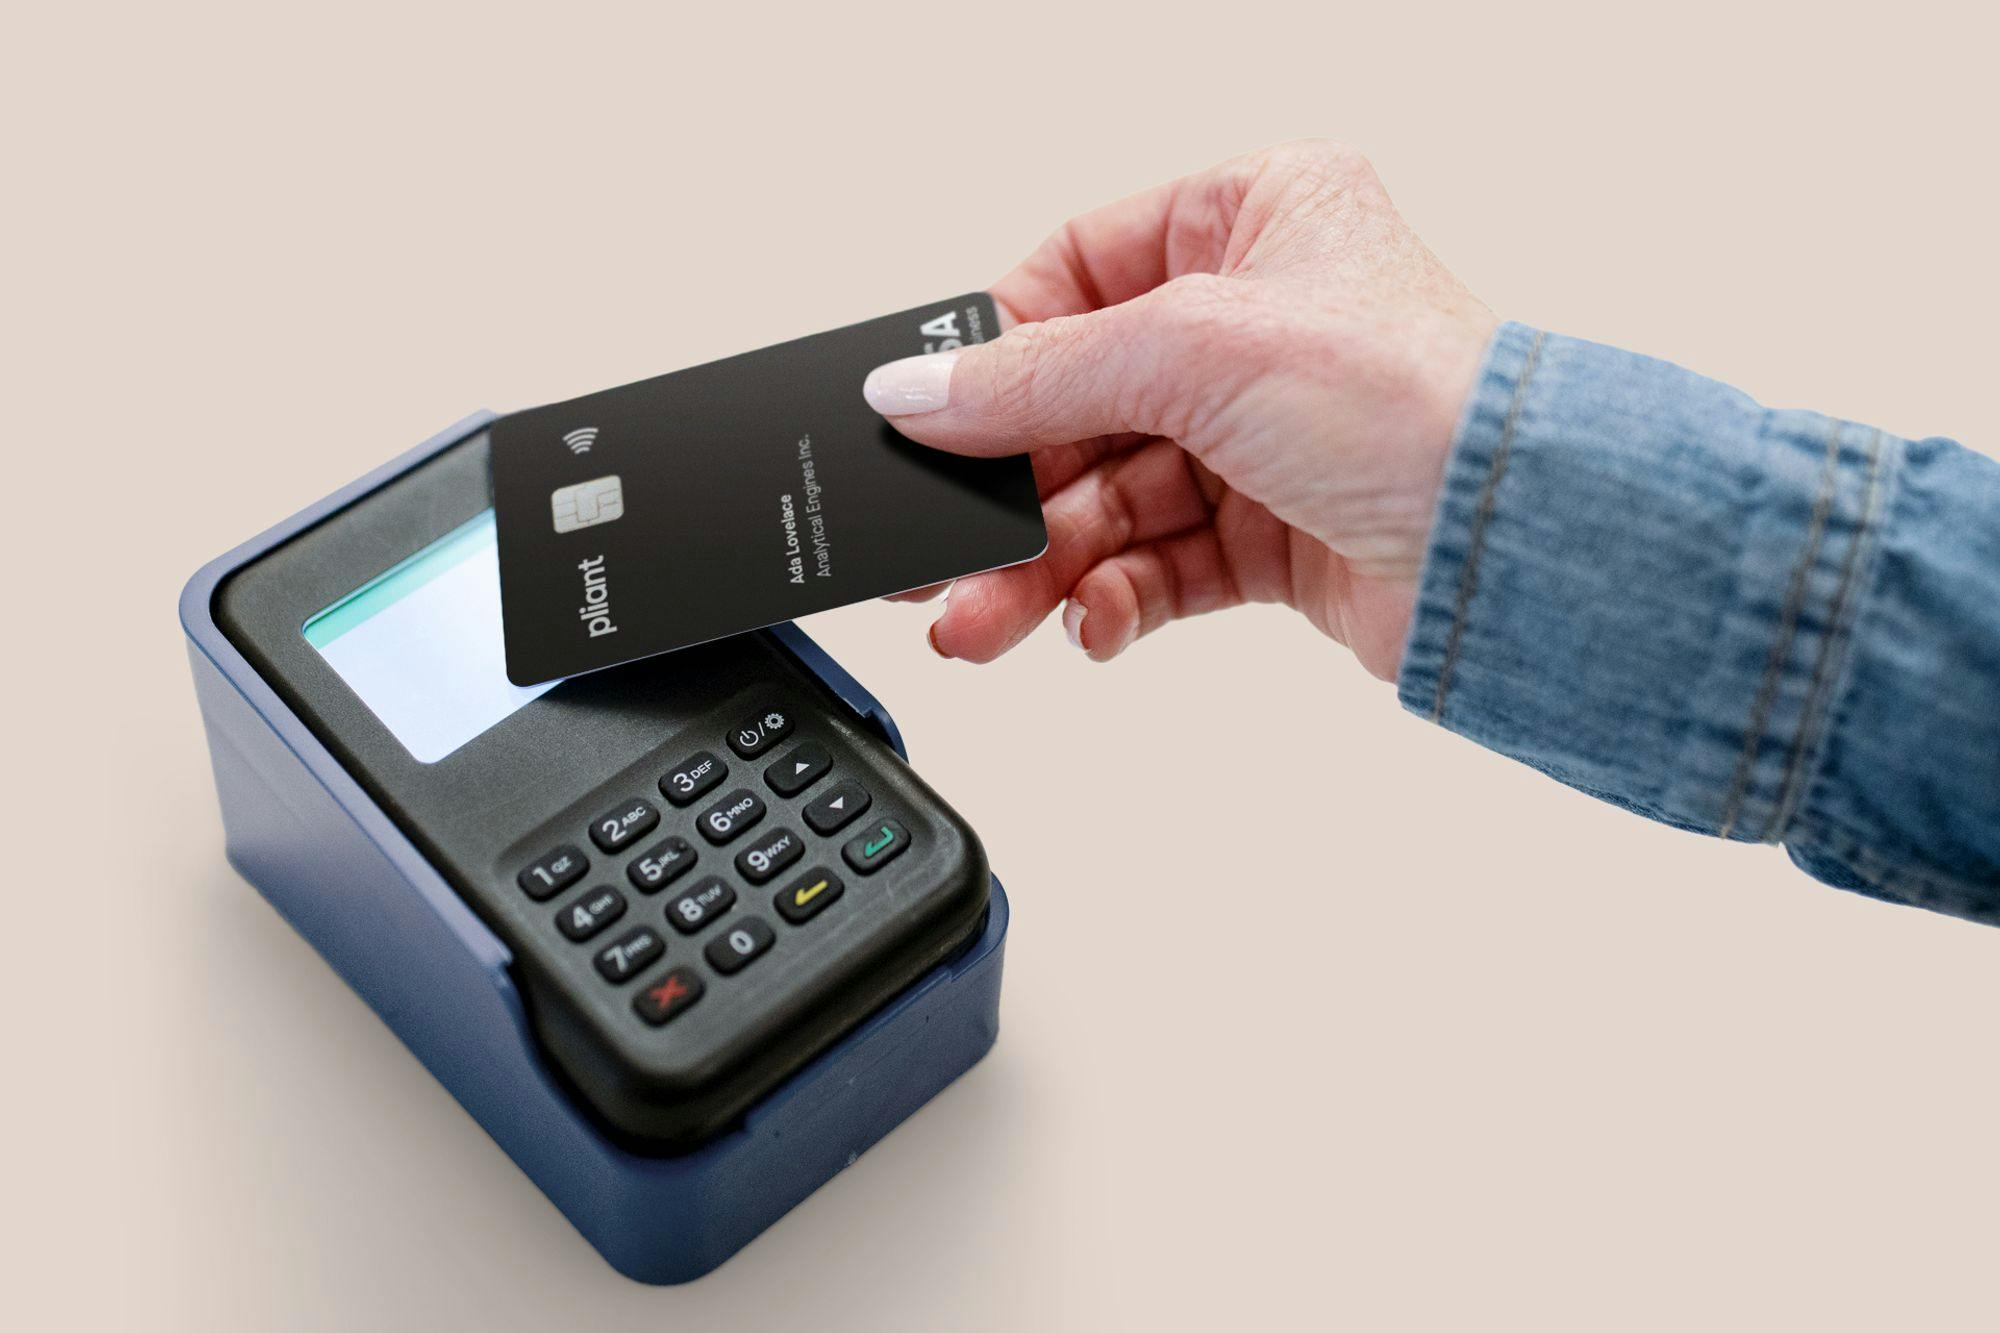 A Pliant business credit card at a payment terminal.